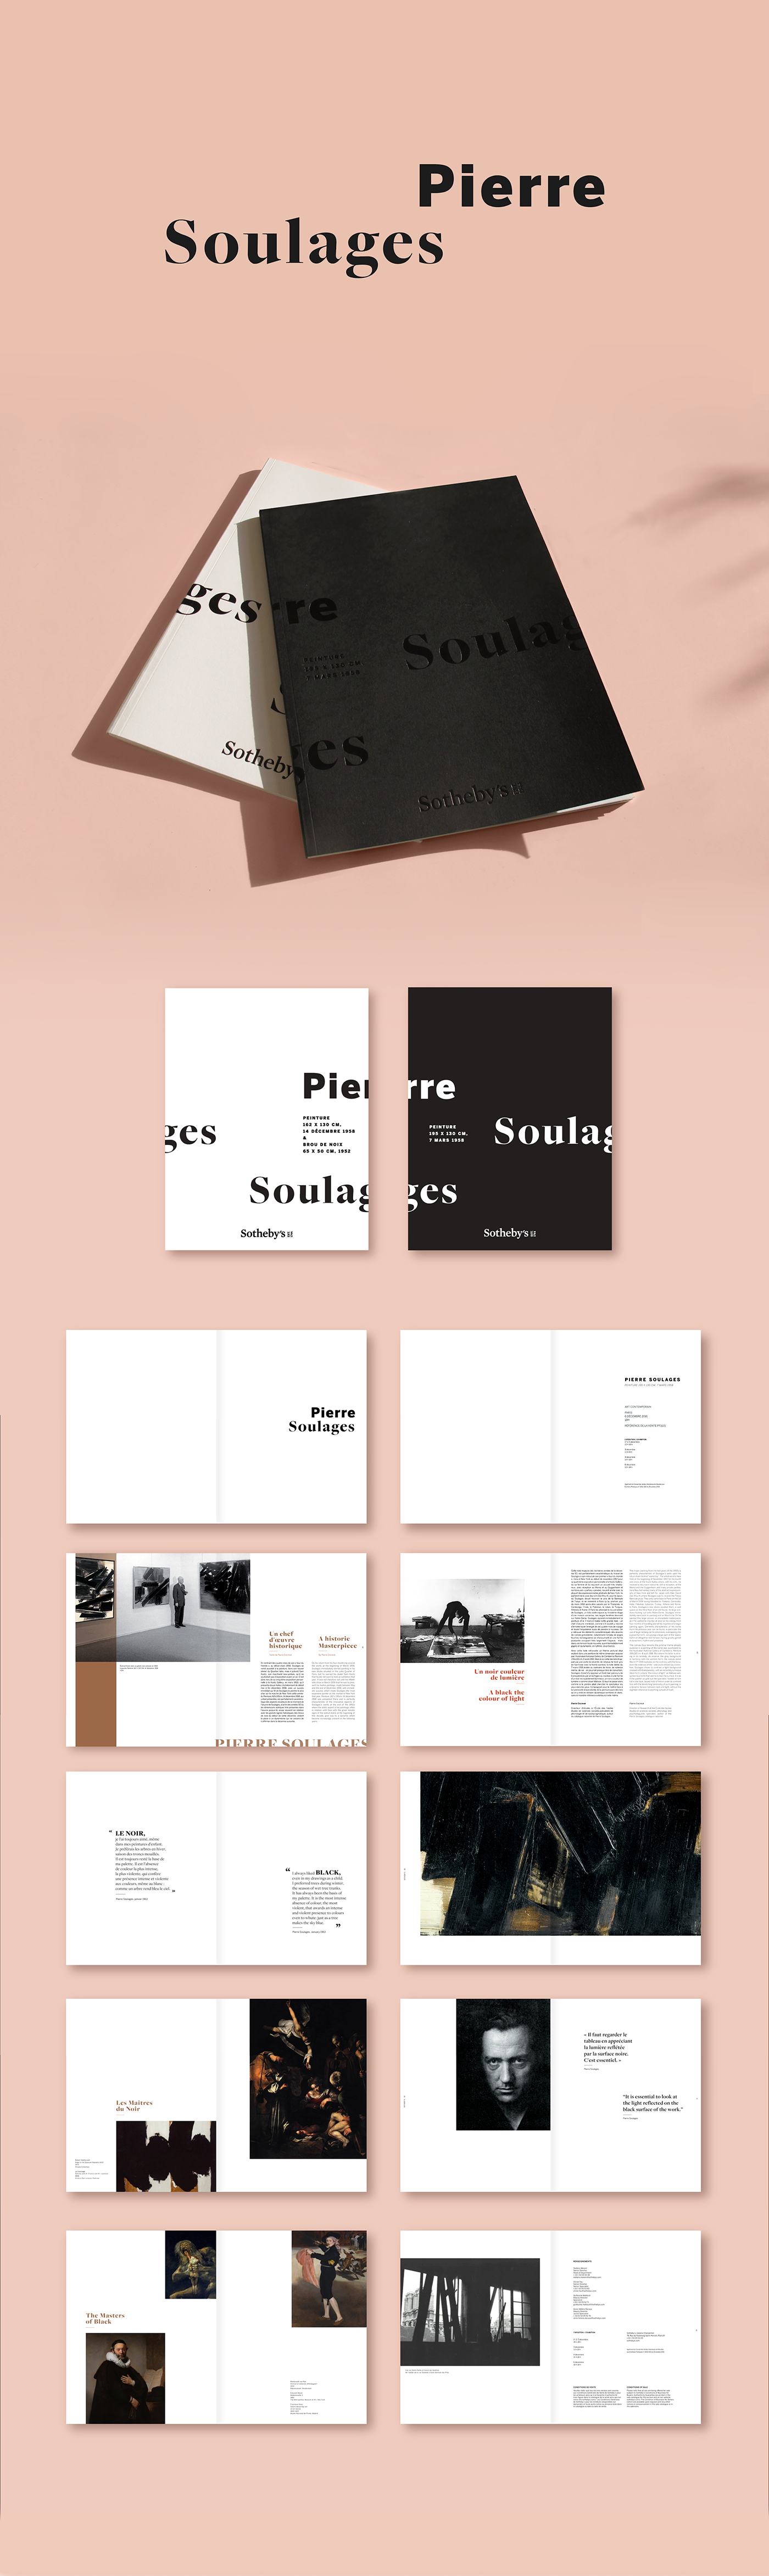 Layout black Soulages sothebys graphic design  editorial design  print edition art complementary